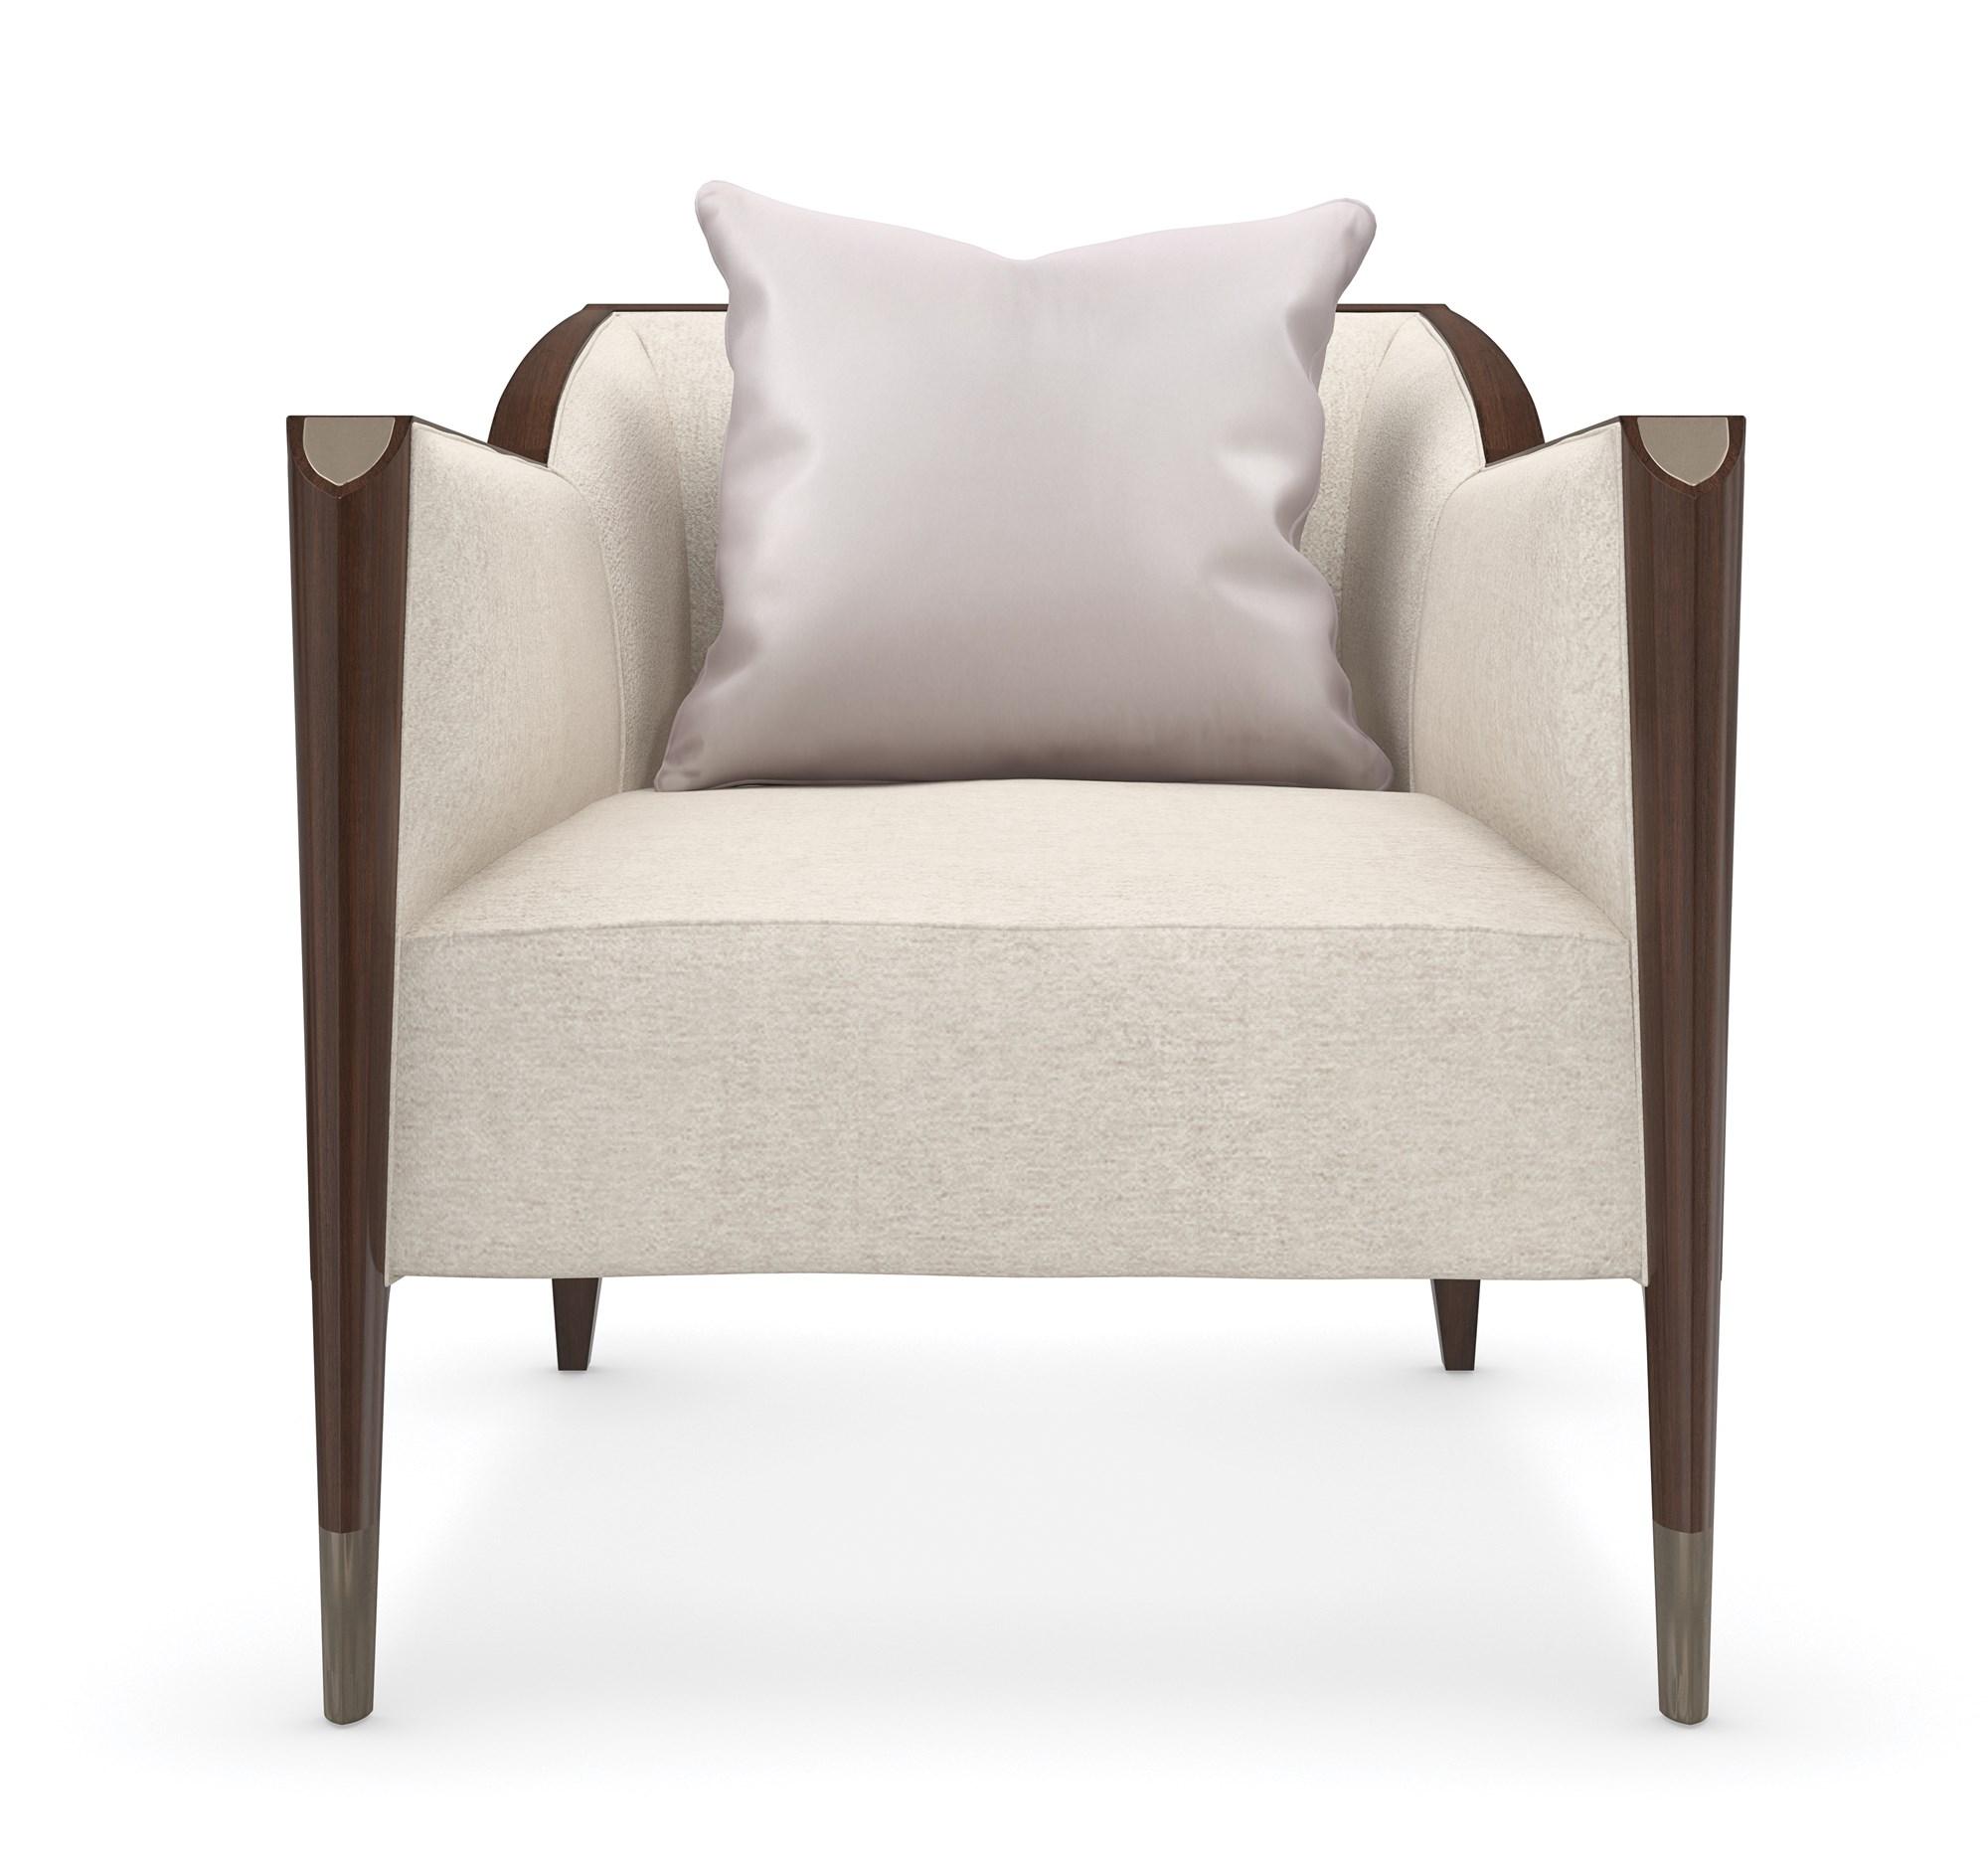 

    
Sapele Veneers Afterglow Fabric THE OXFORD ACCENT CHAIR by Caracole
